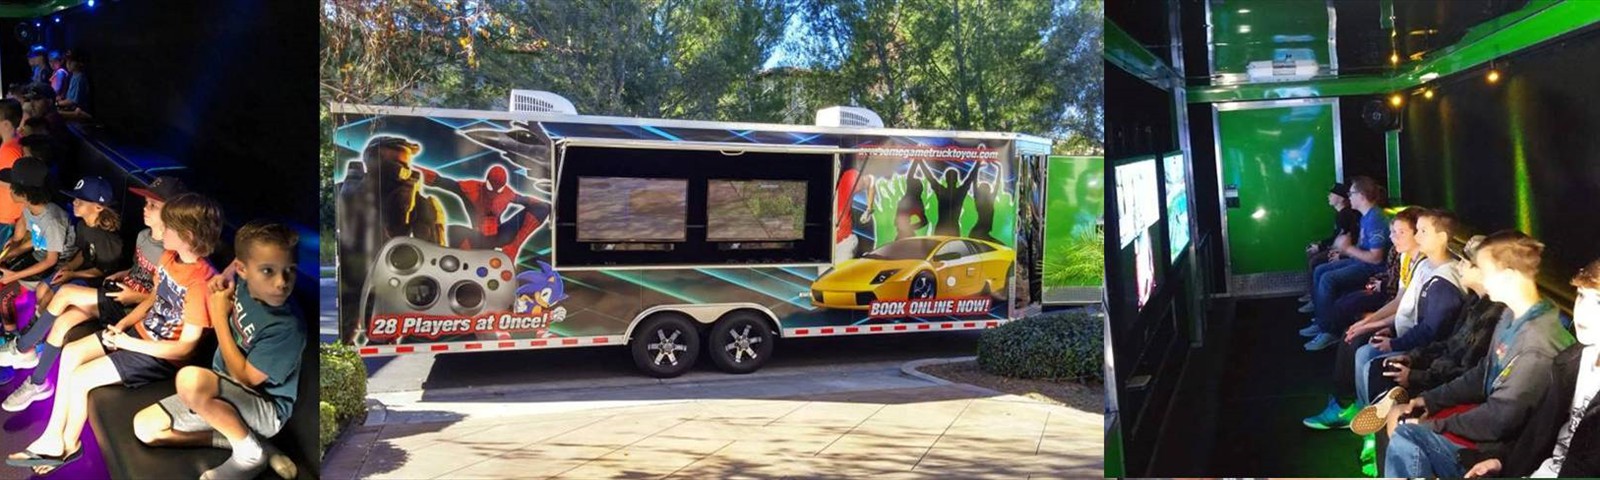 Totally Rad Video Games - Game truck, Mobile Laser Tag, Foam